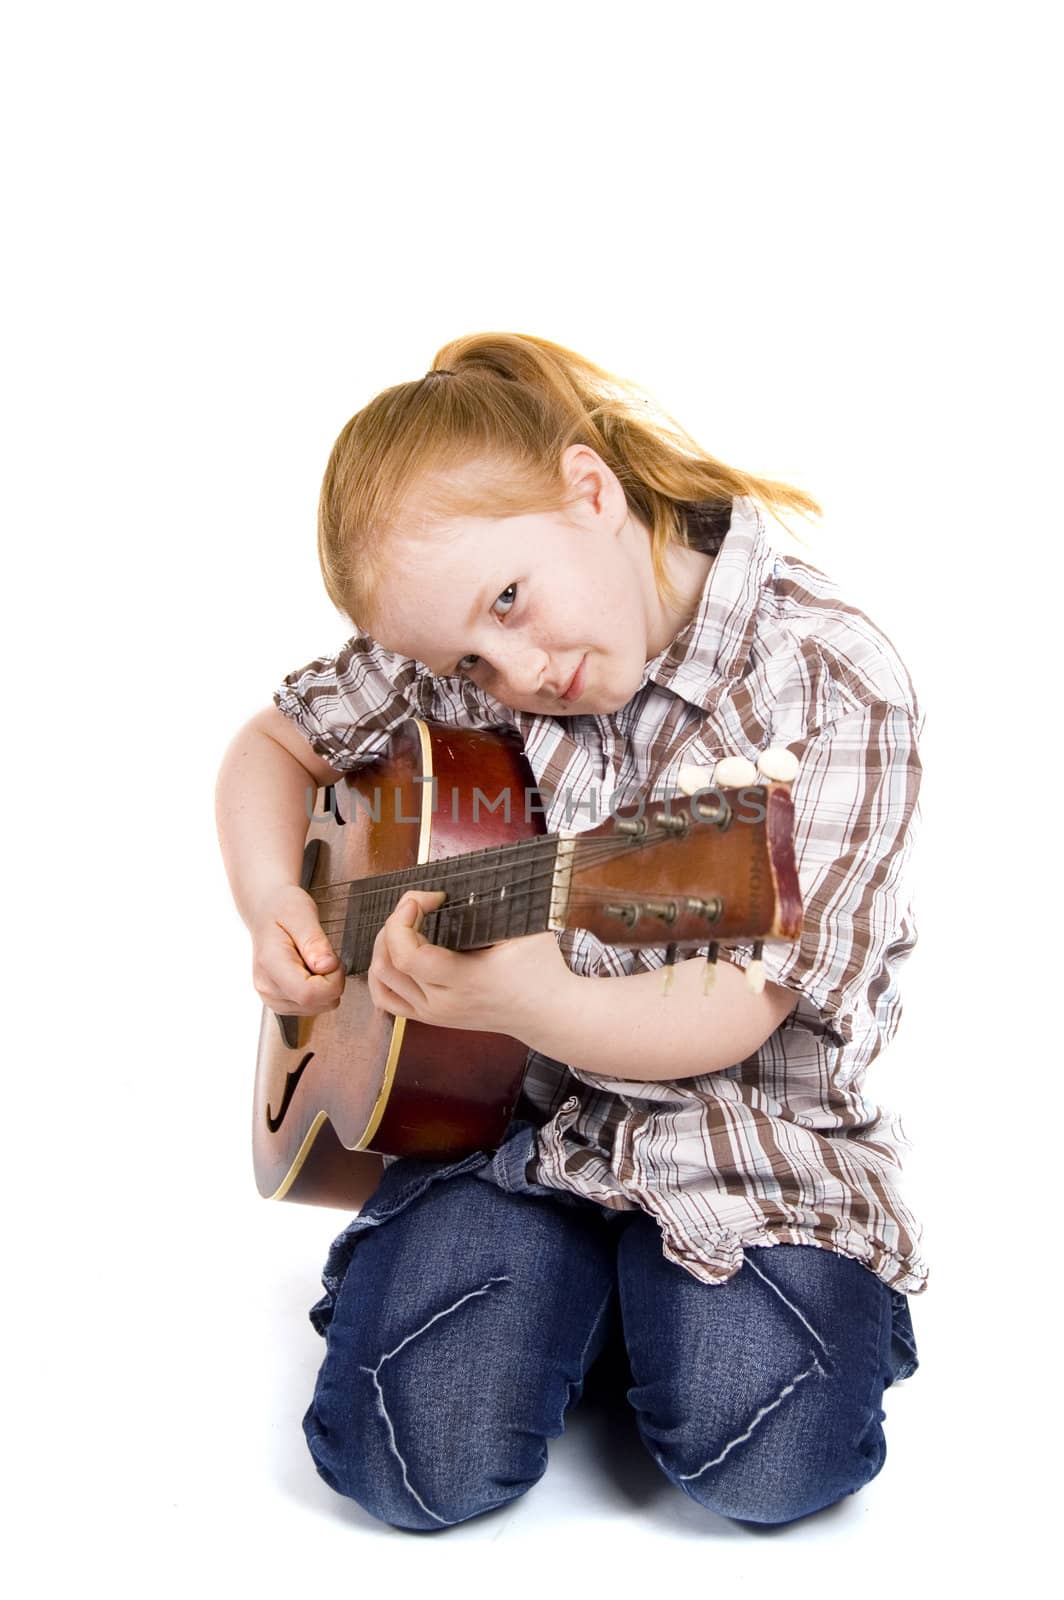 little girl playing on a guitar by ladyminnie